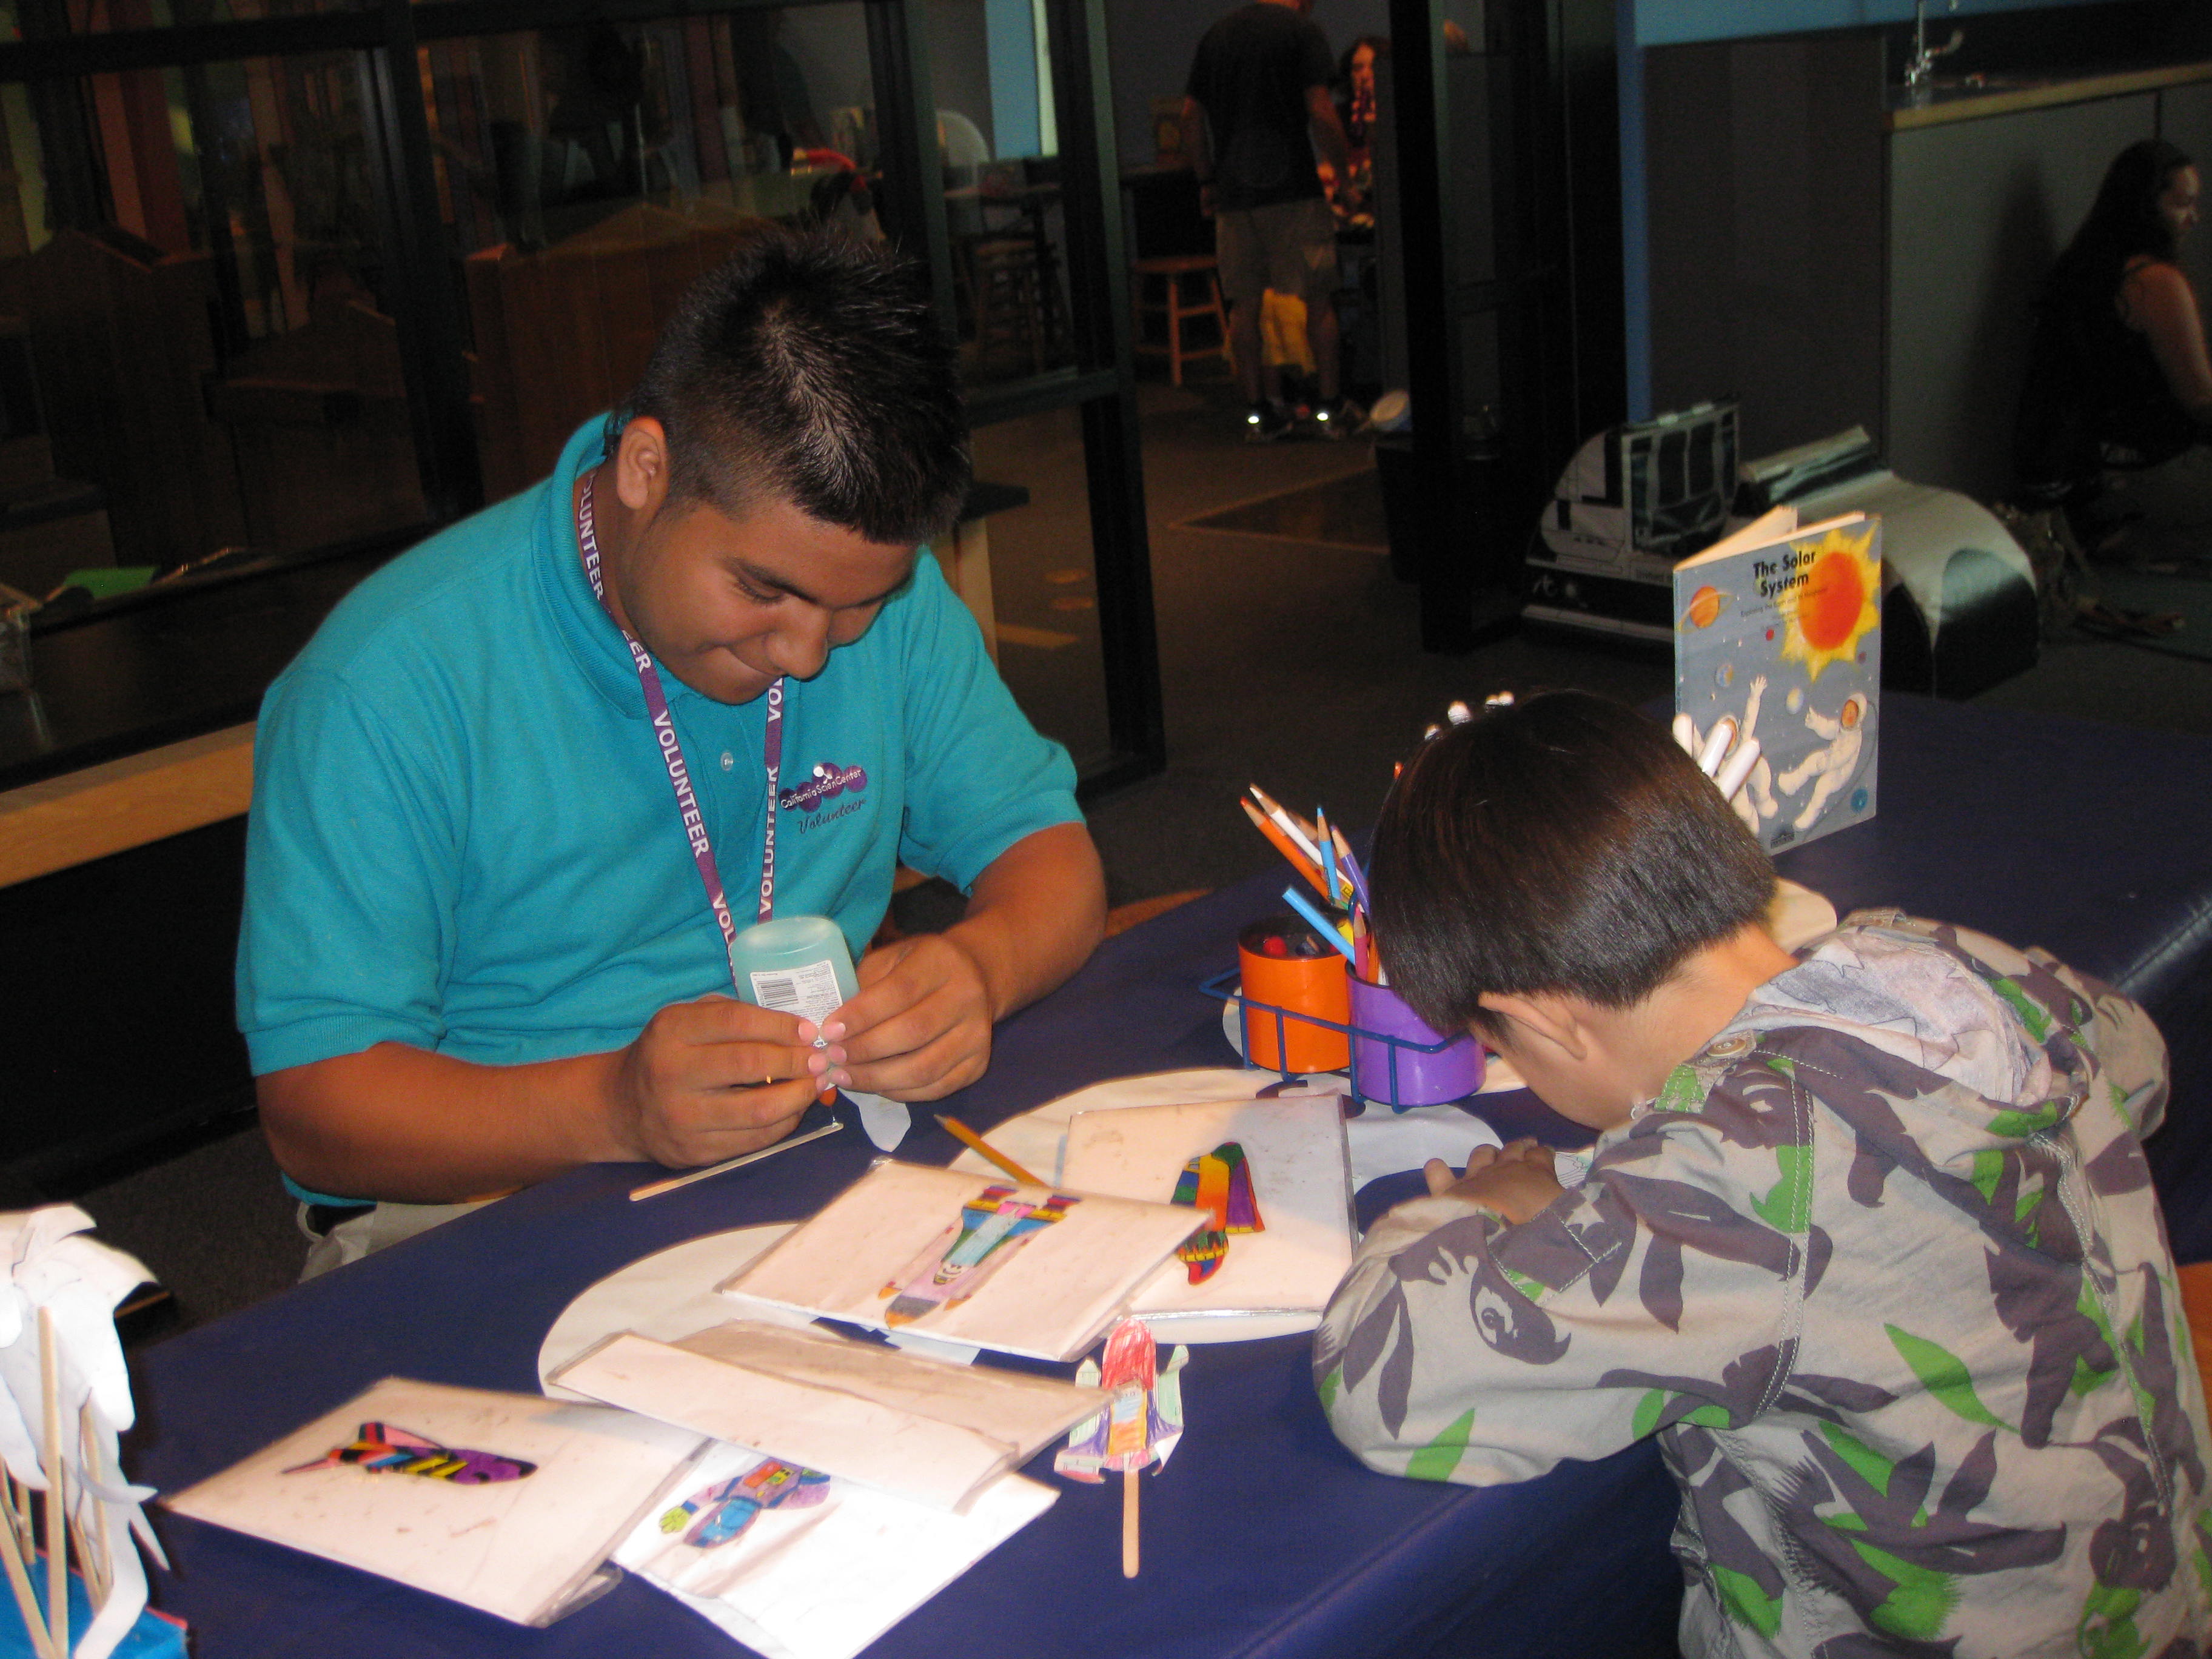 Discovery Room Volunteer wearing teal polo glues Endeavour craft with participating child